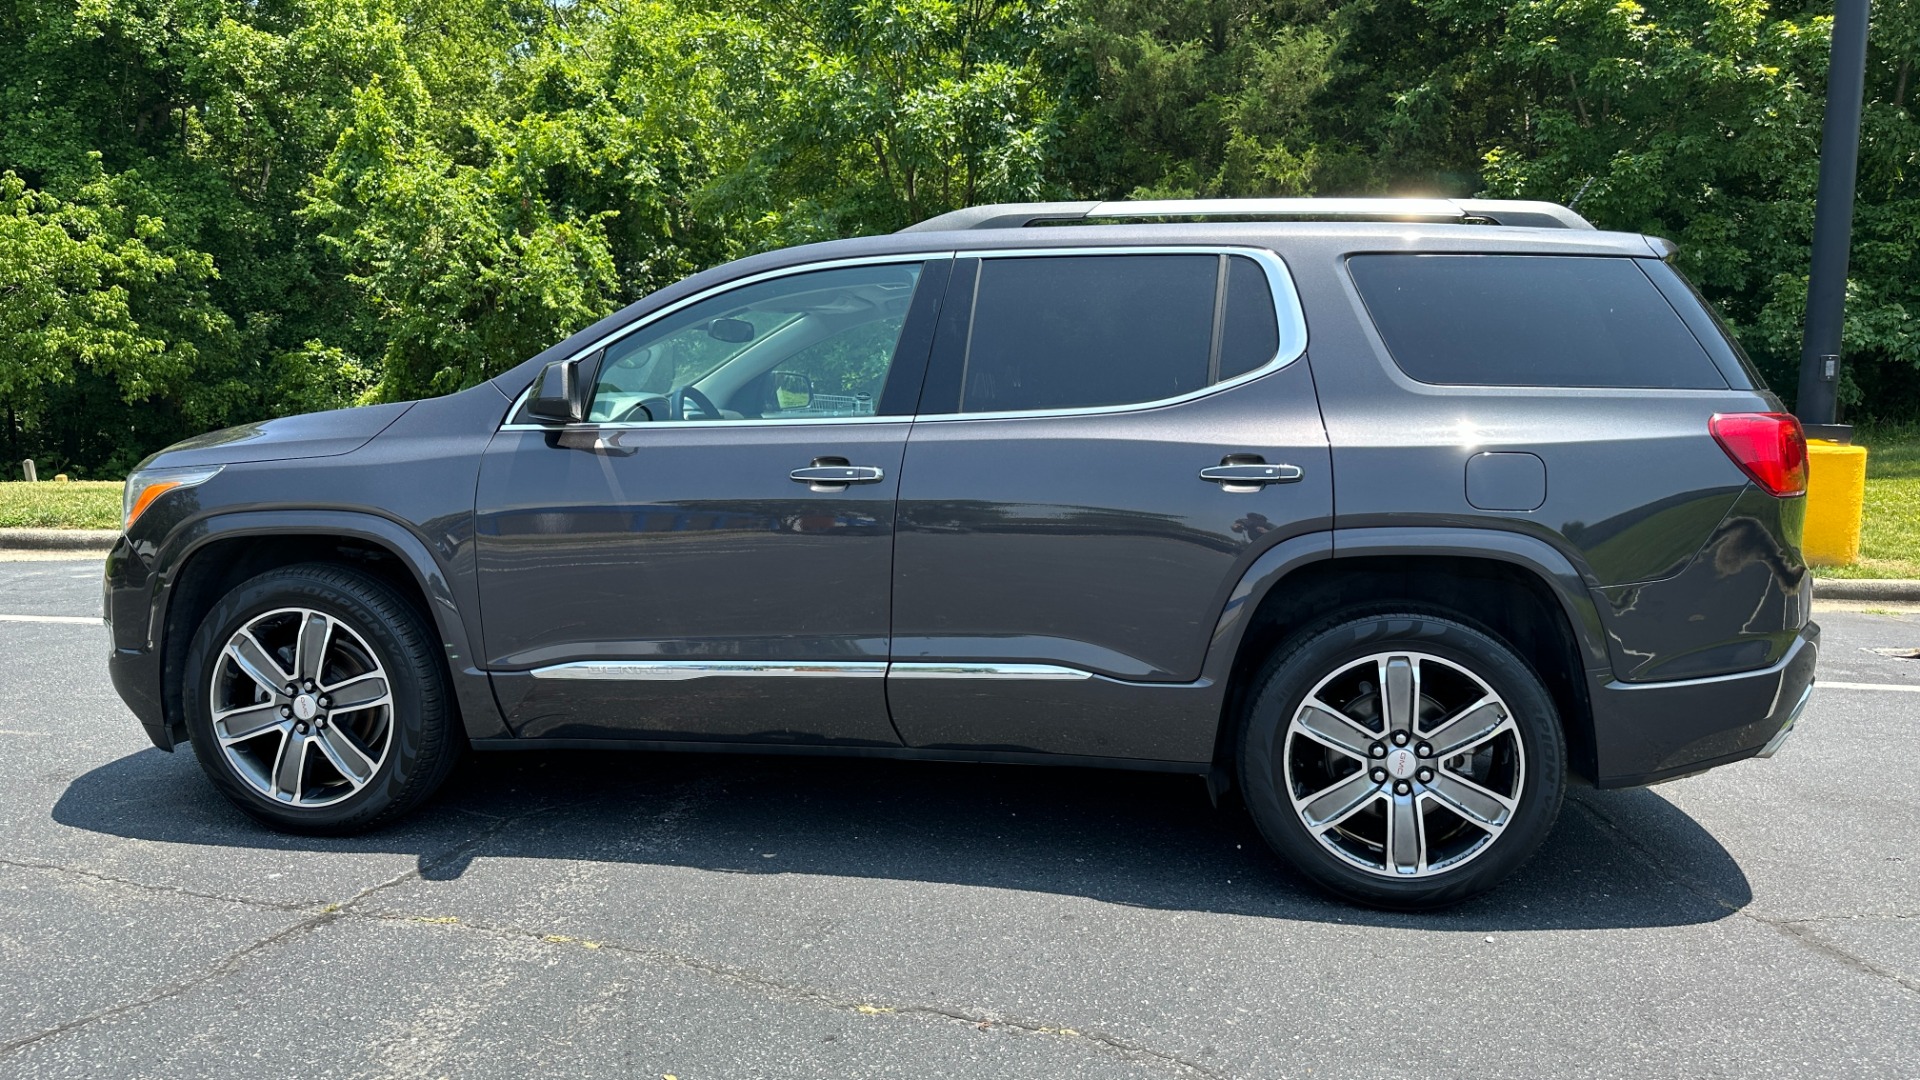 Used 2017 GMC Acadia DENALI / LOADED / PANORAMIC ROOF / METALLIC PAINT for sale Sold at Formula Imports in Charlotte NC 28227 3